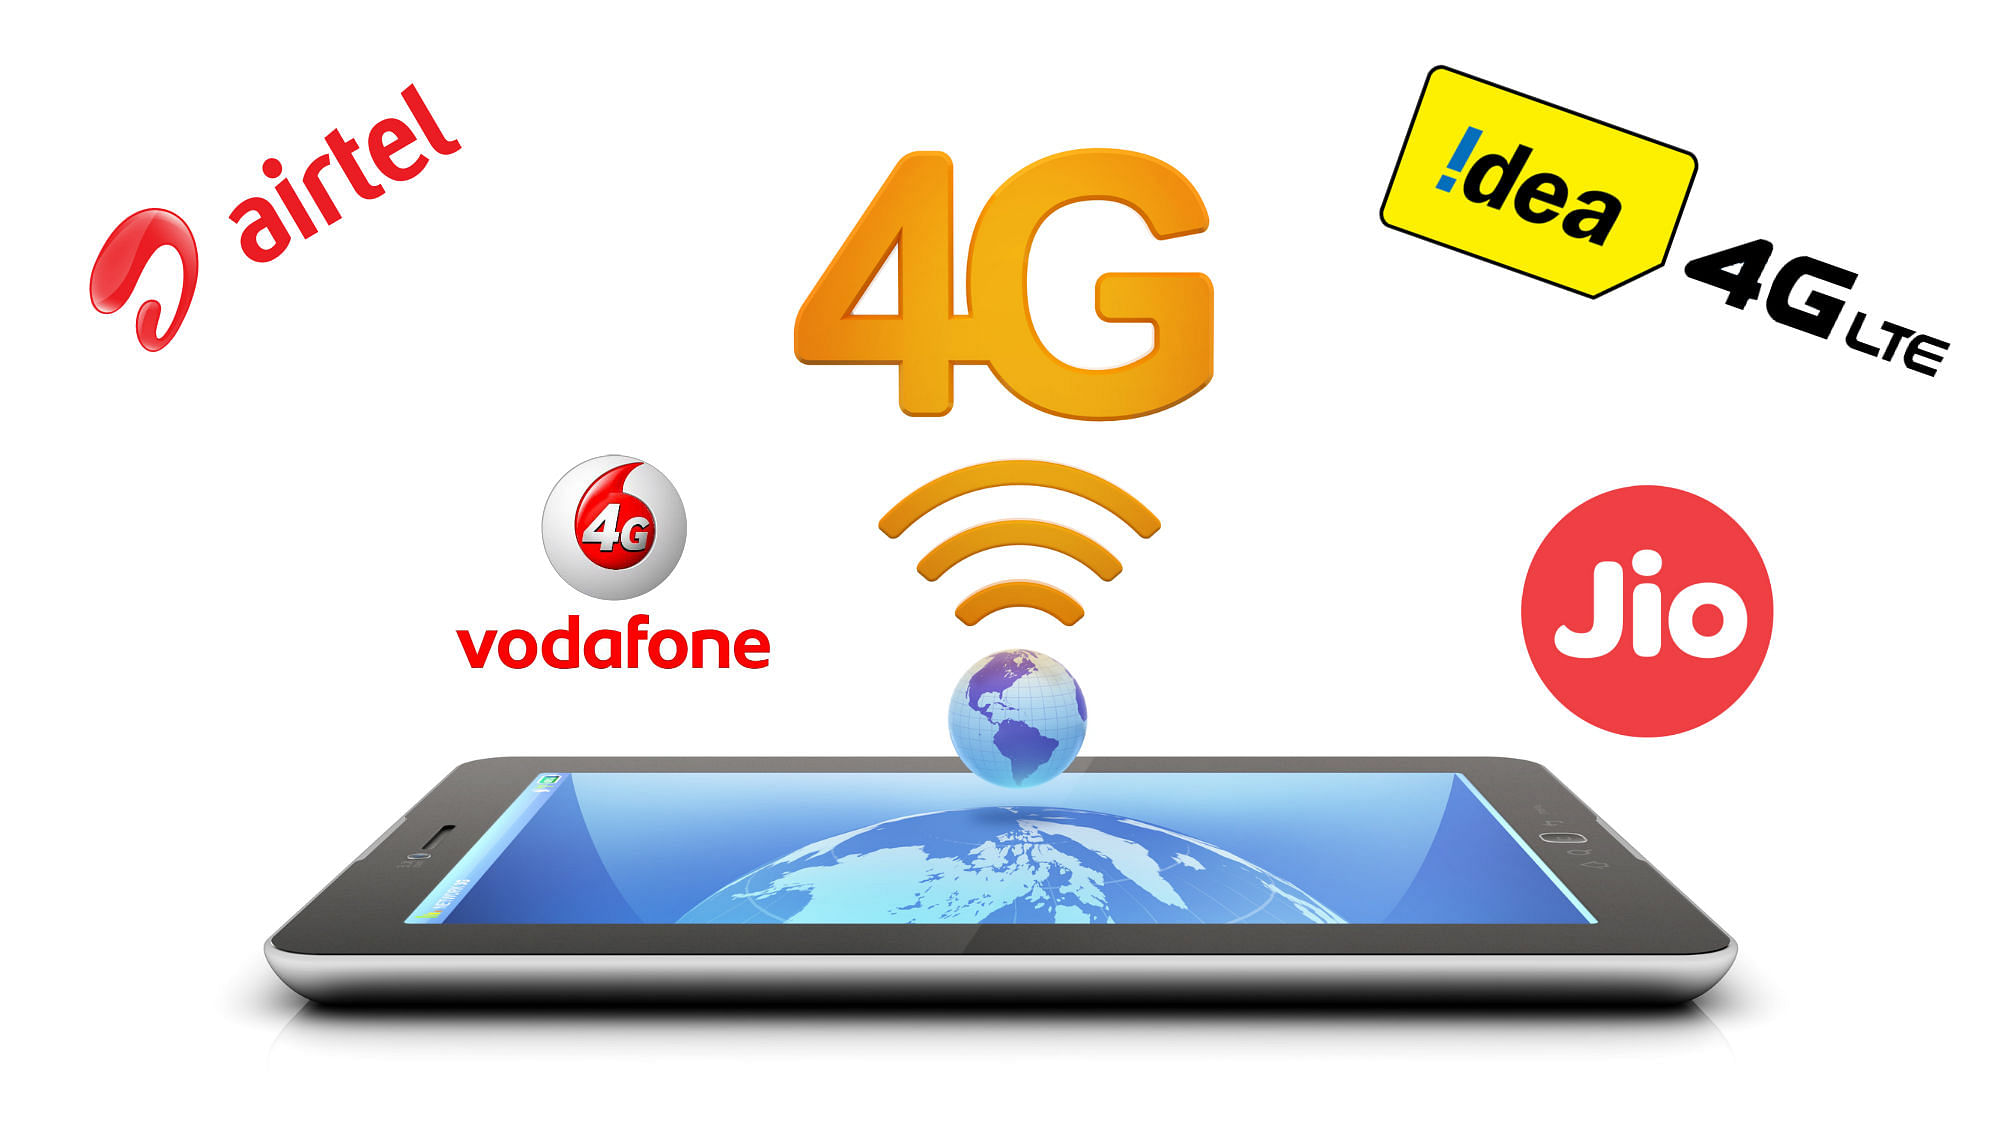 All 4G data prepaid plans available right now have been detailed. (Photo: <b>The Quint</b>)